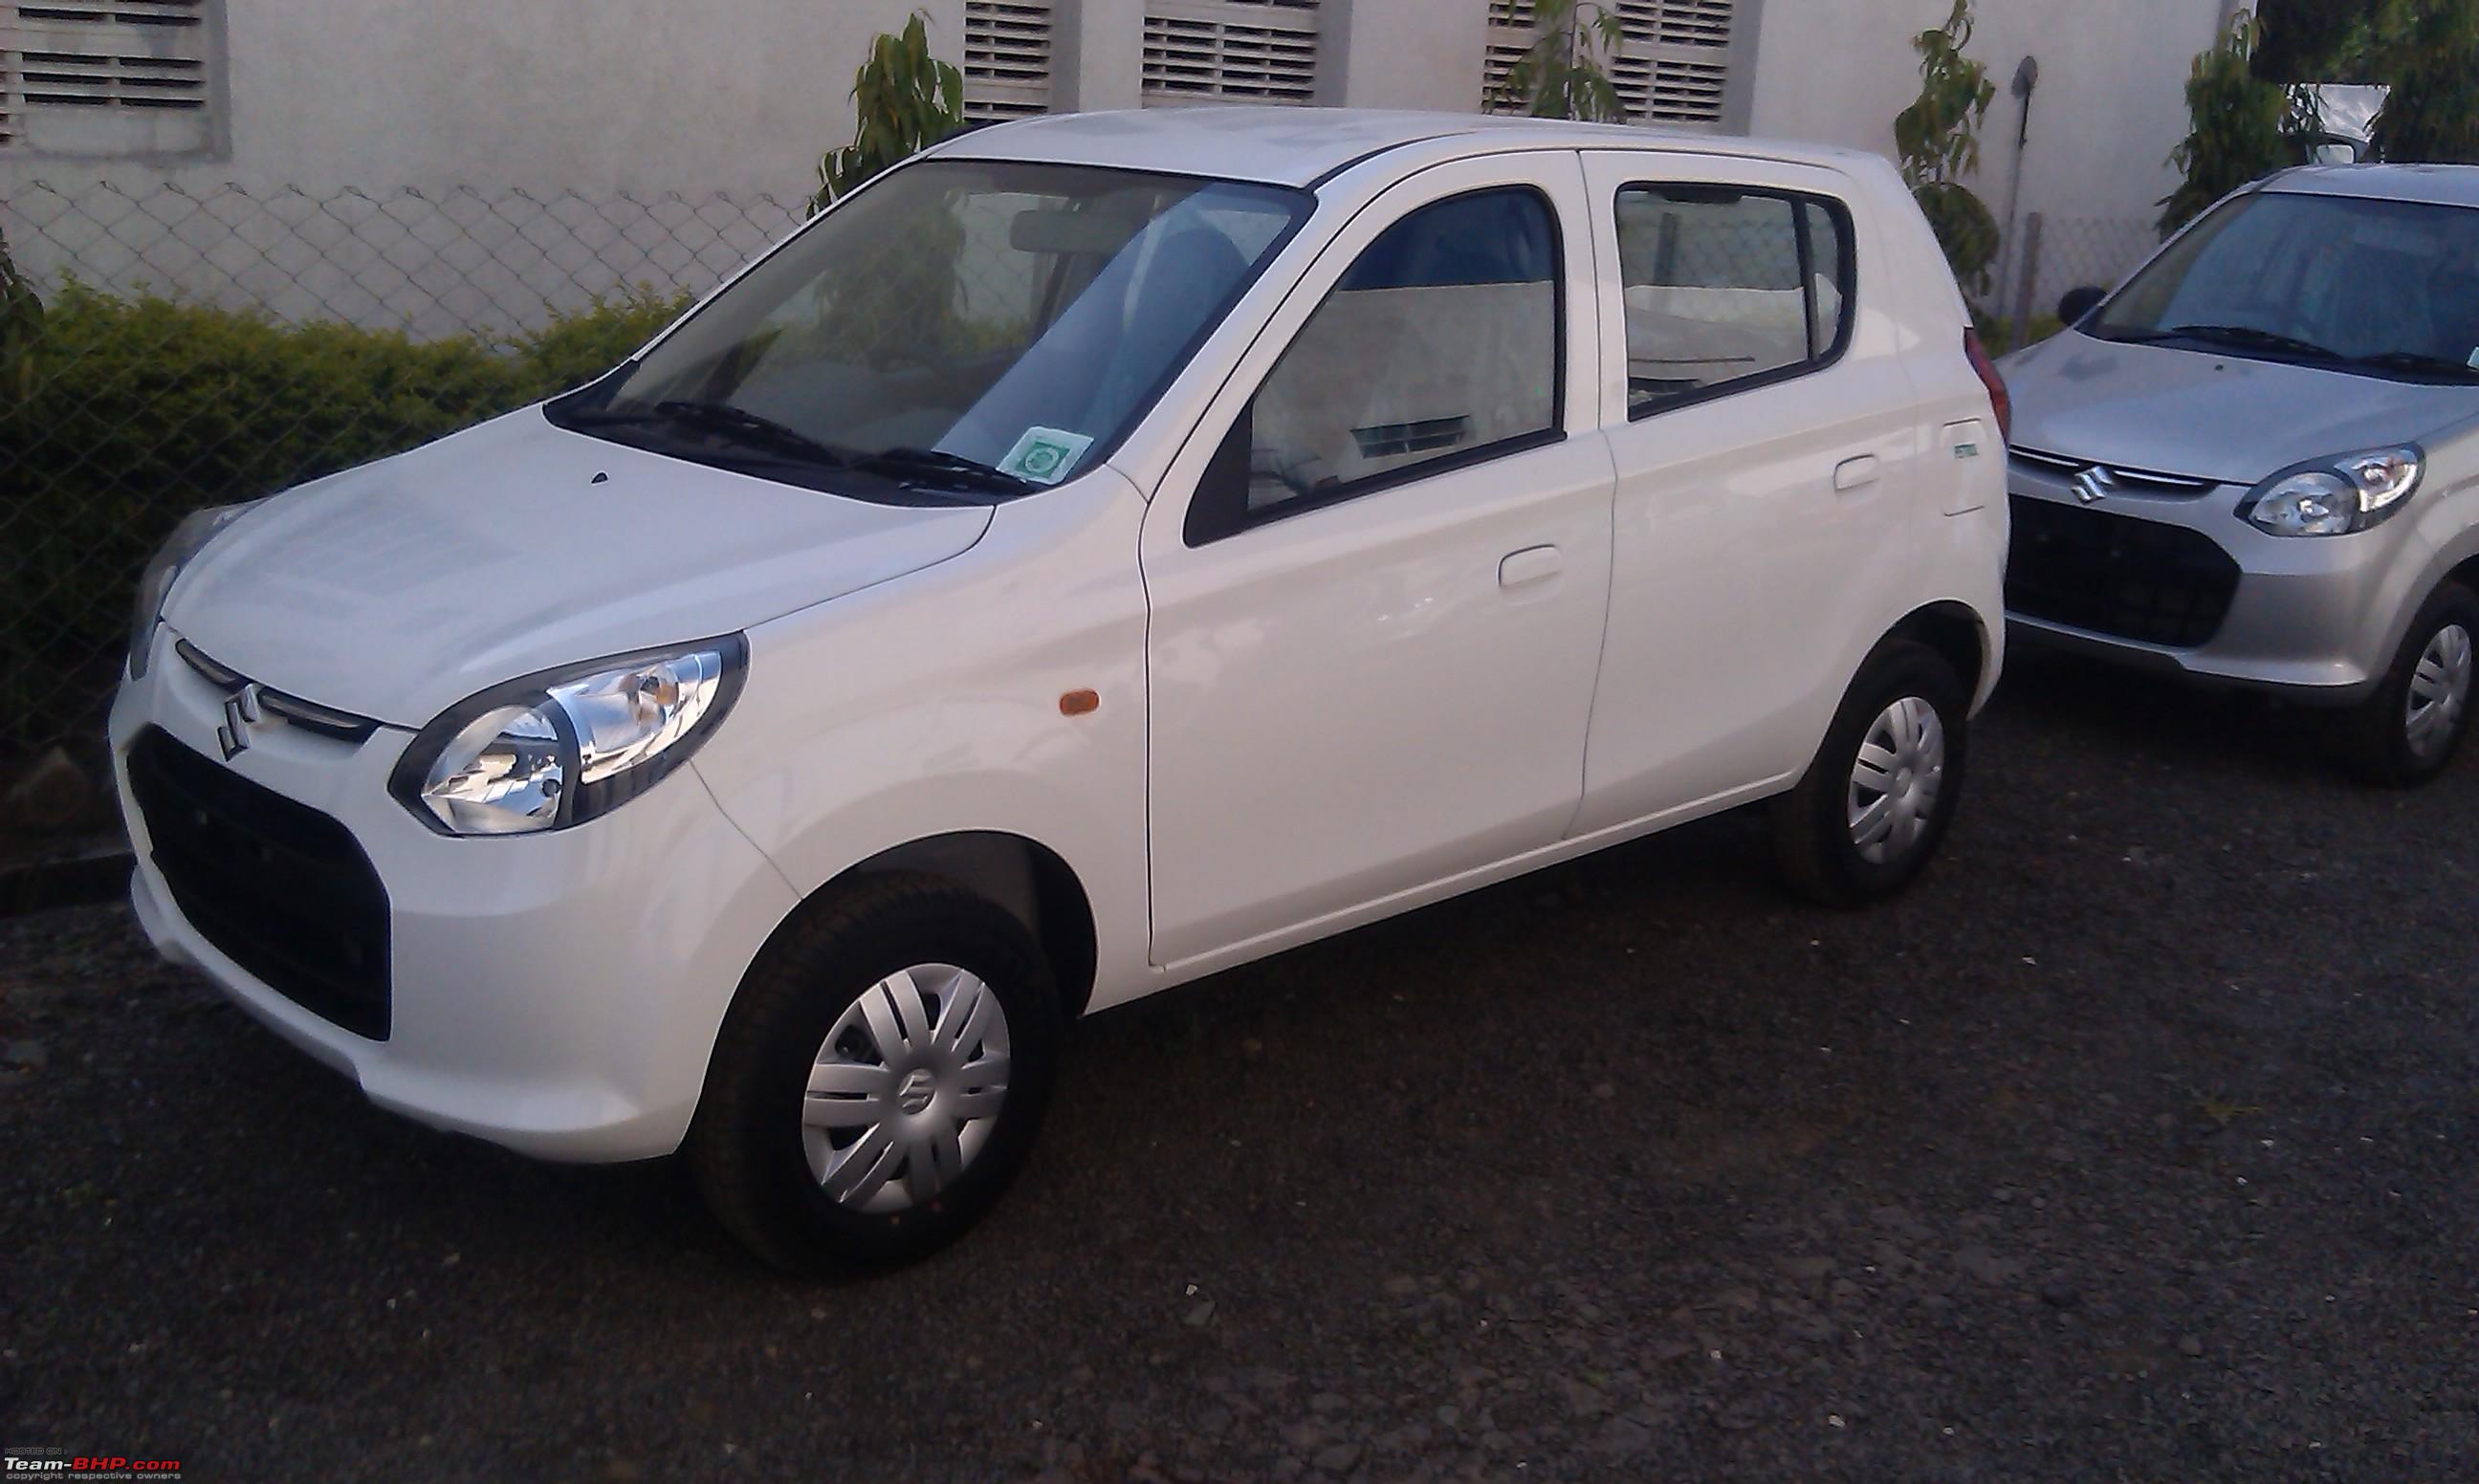 New Maruti Alto 800 Edit Clear Scoop Pictures On Page 18 20